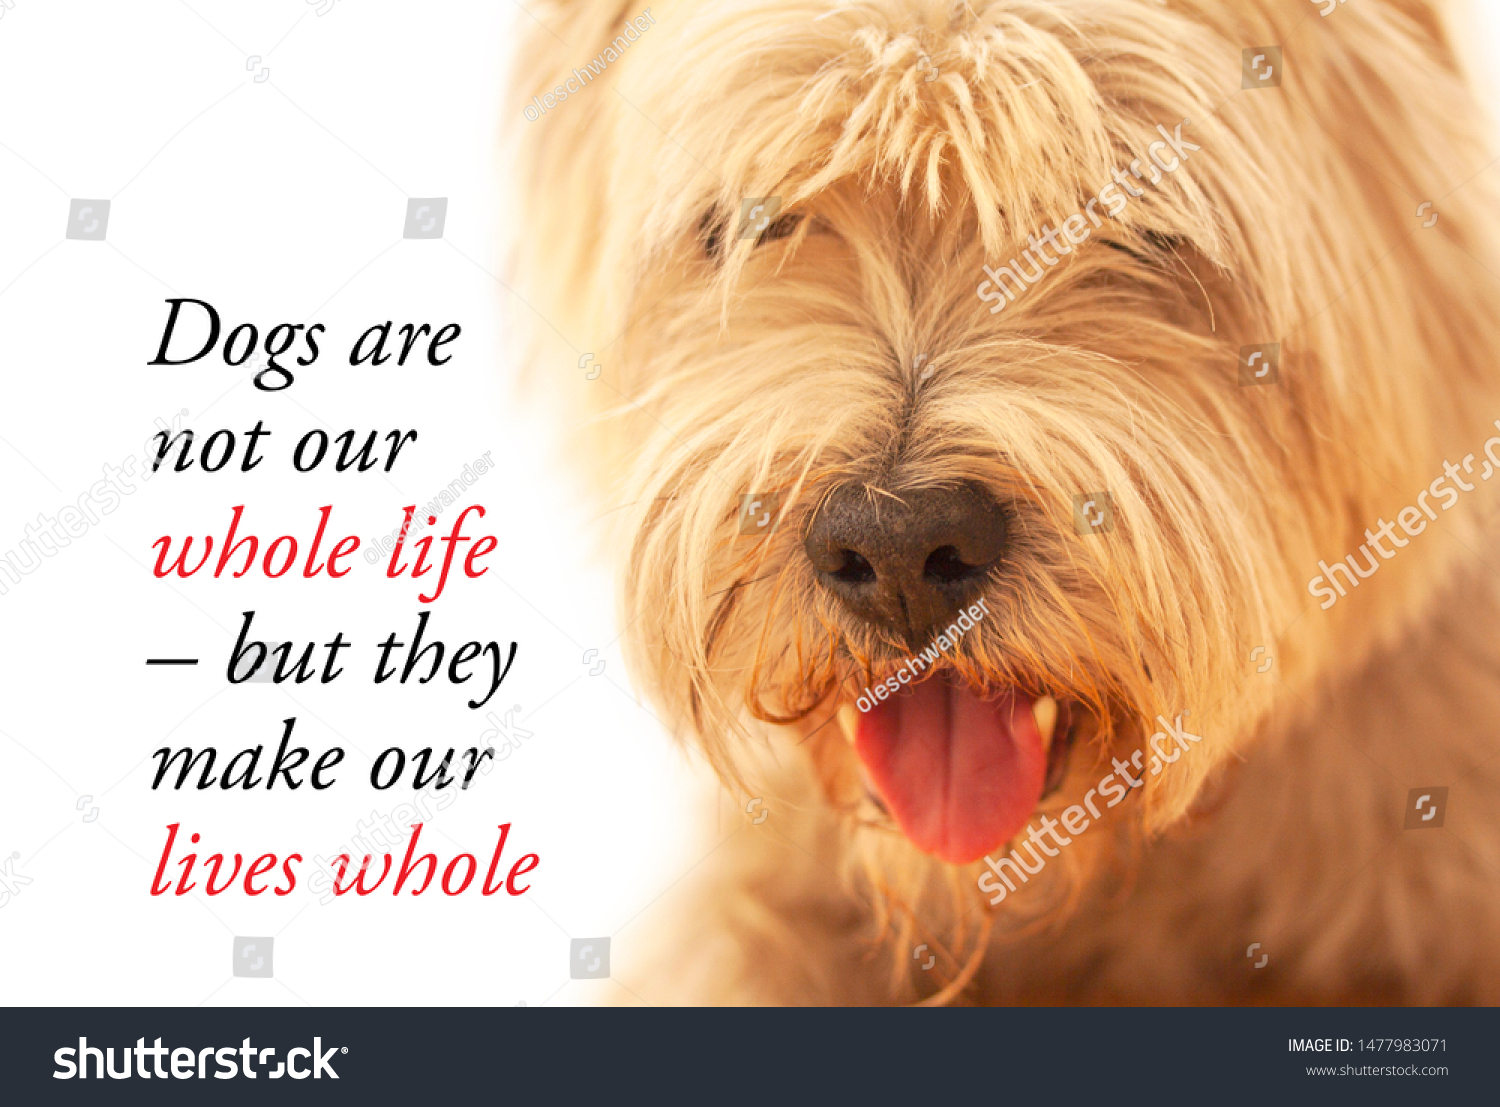 Inspirational quote about dogs and humans saying - Dogs are not our whole life, but they make our lives whole. With cute West Highland White Terrier dog. - Image #1477983071